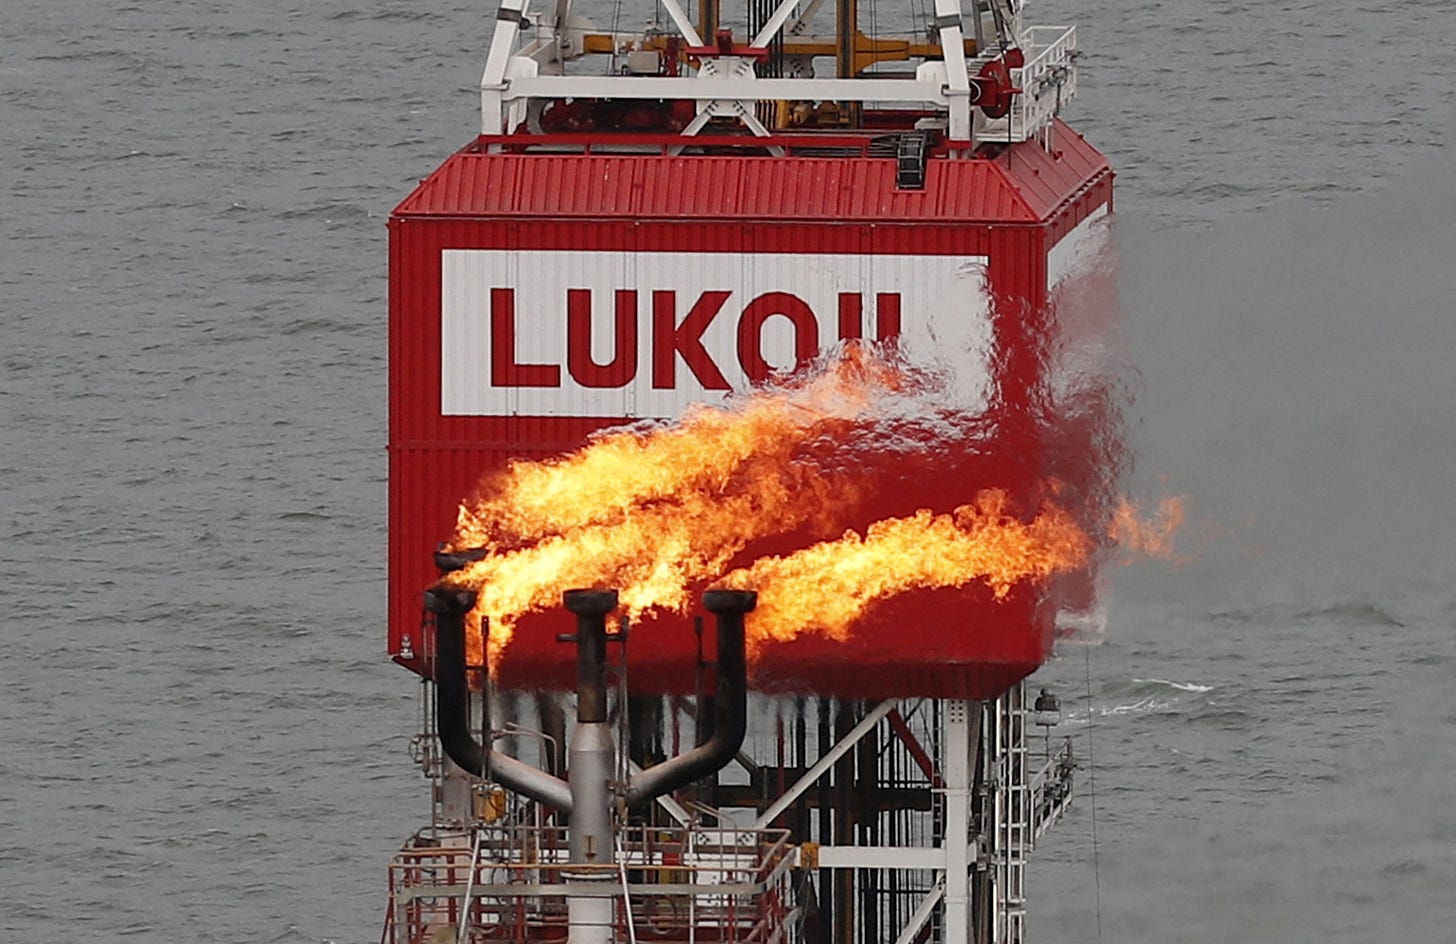 Italy could nationalise Lukoil refinery, sources say | Reuters